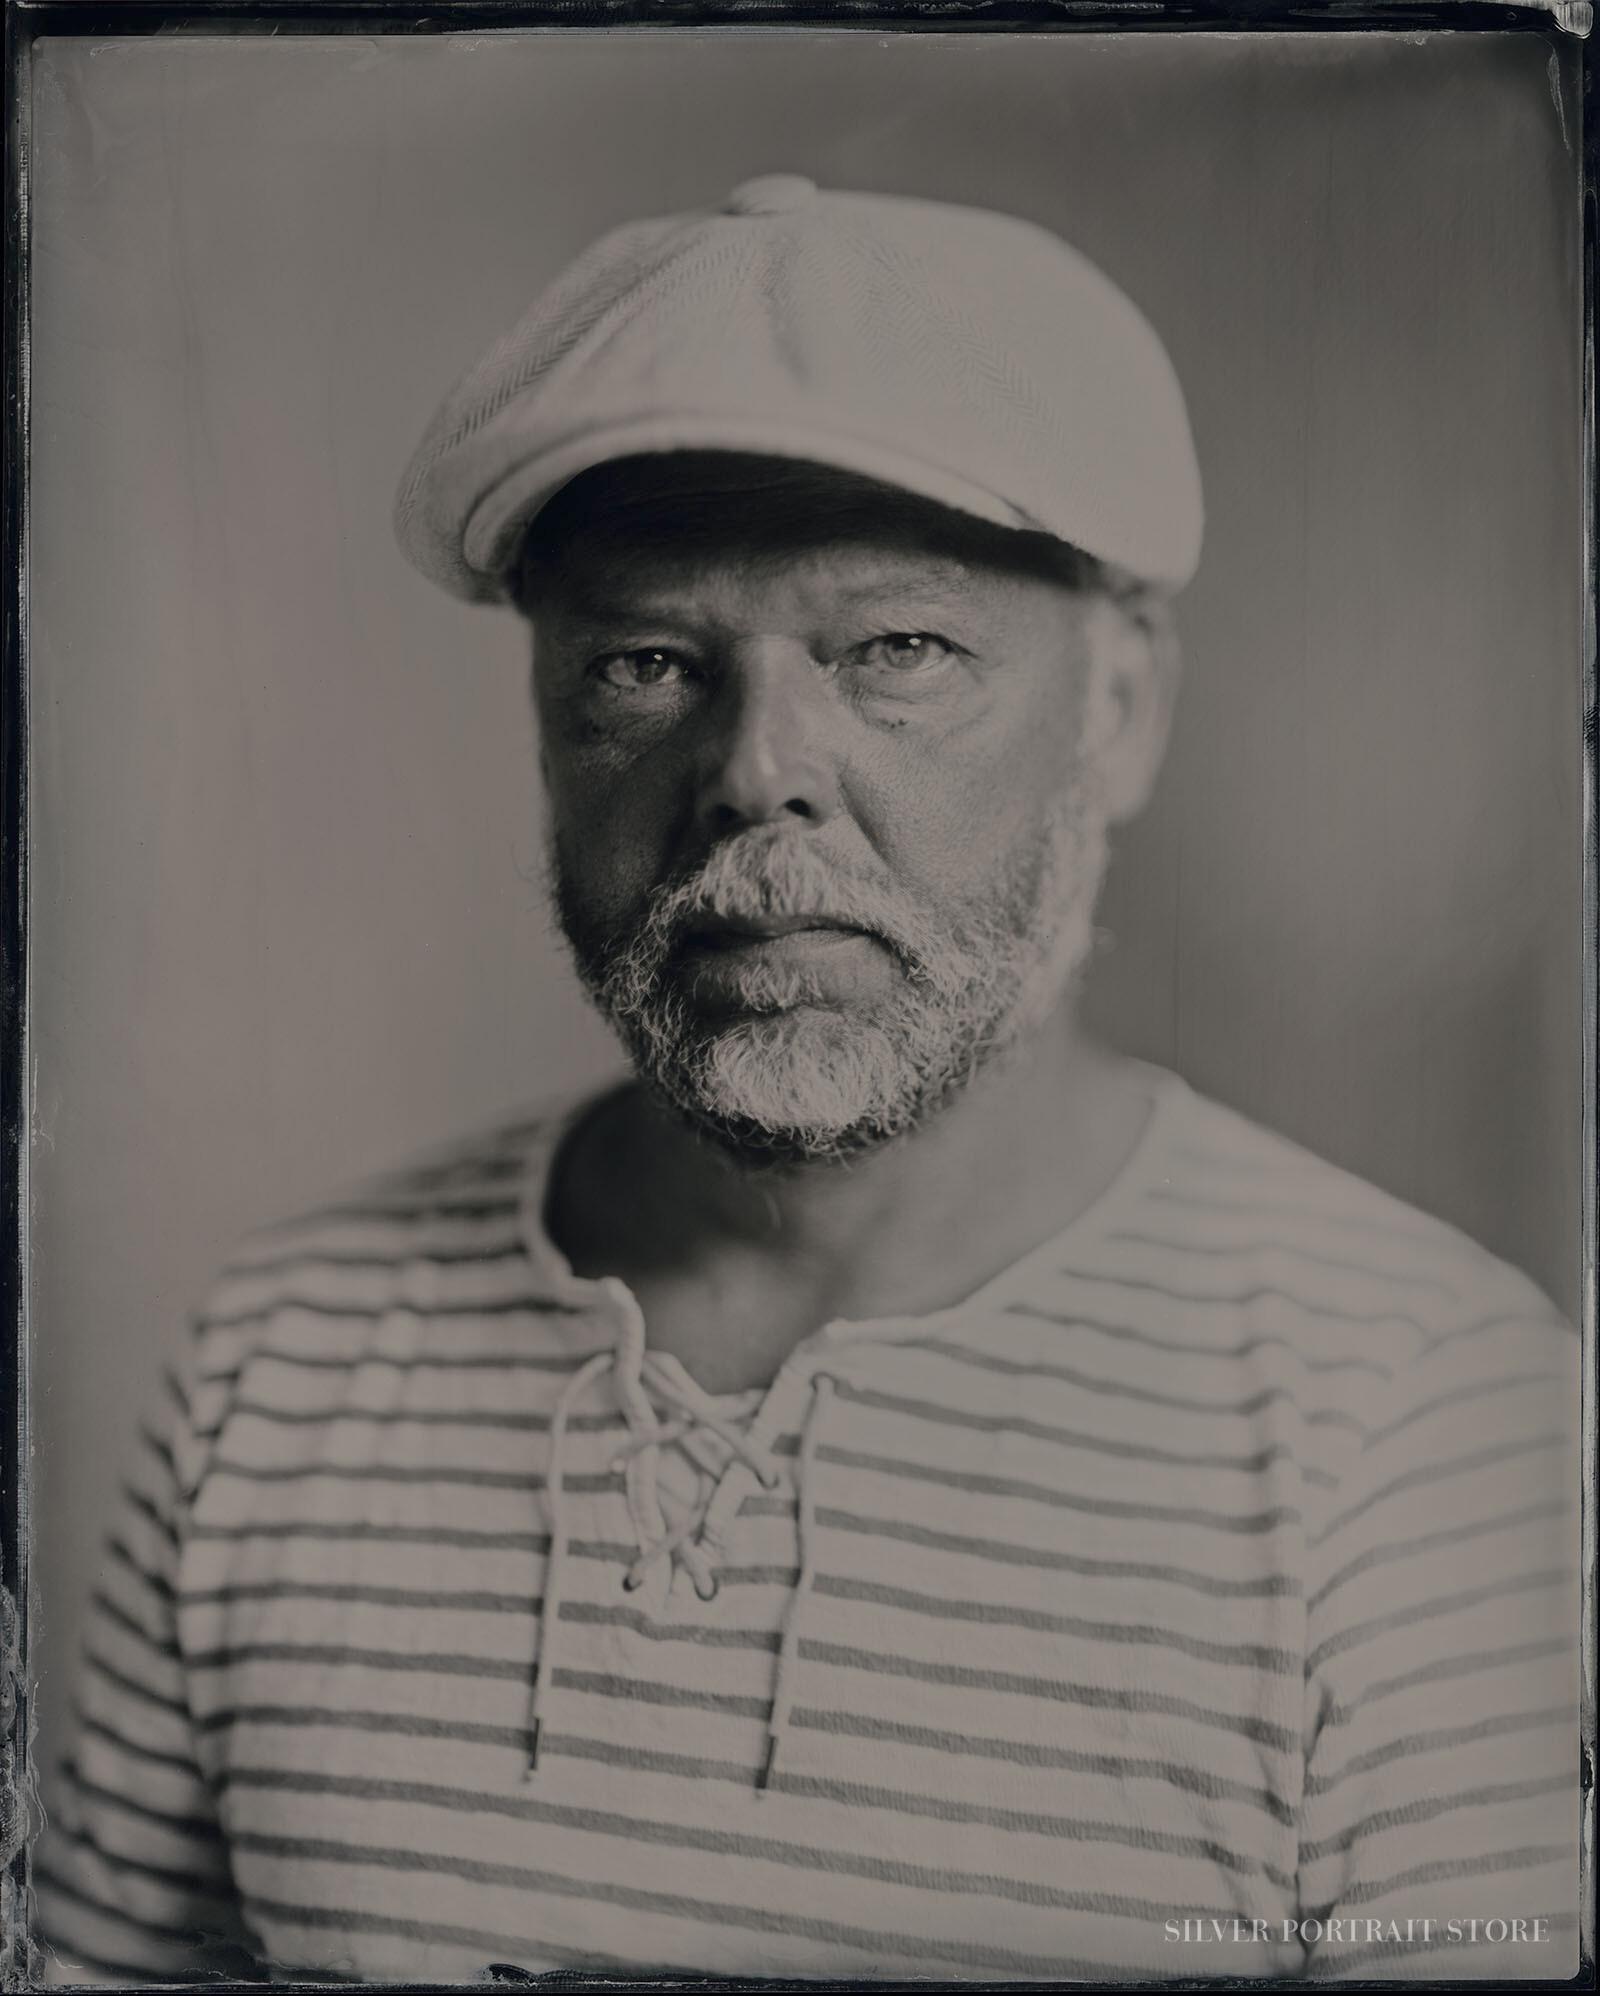 Willem Gast-Silver Portrait Store-Scan from Wet plate collodion-Tintype 20 x 25 cm.